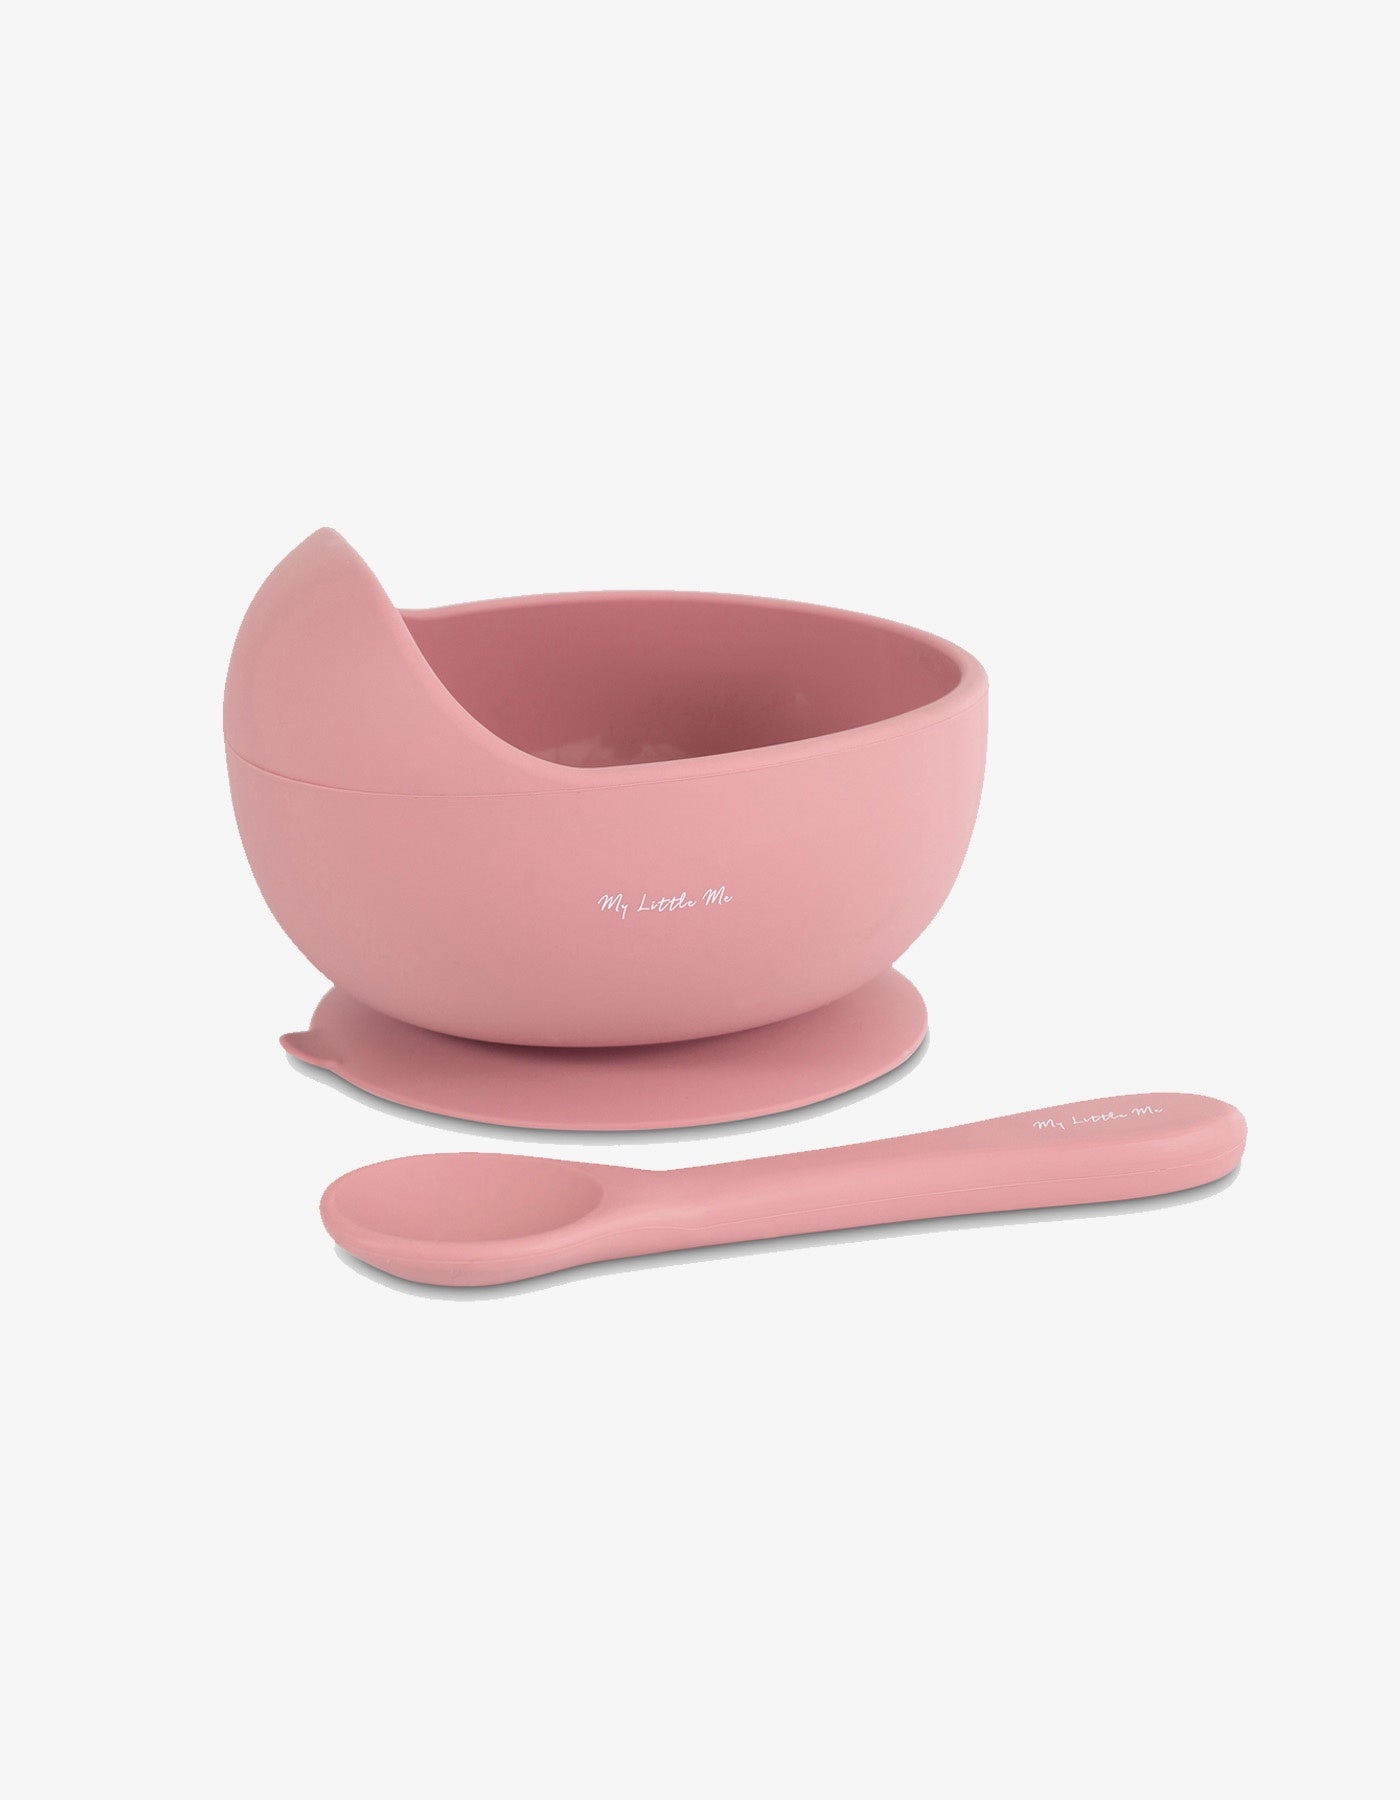 My Little Me Suction Bowl + Spoon - Dusty Rose